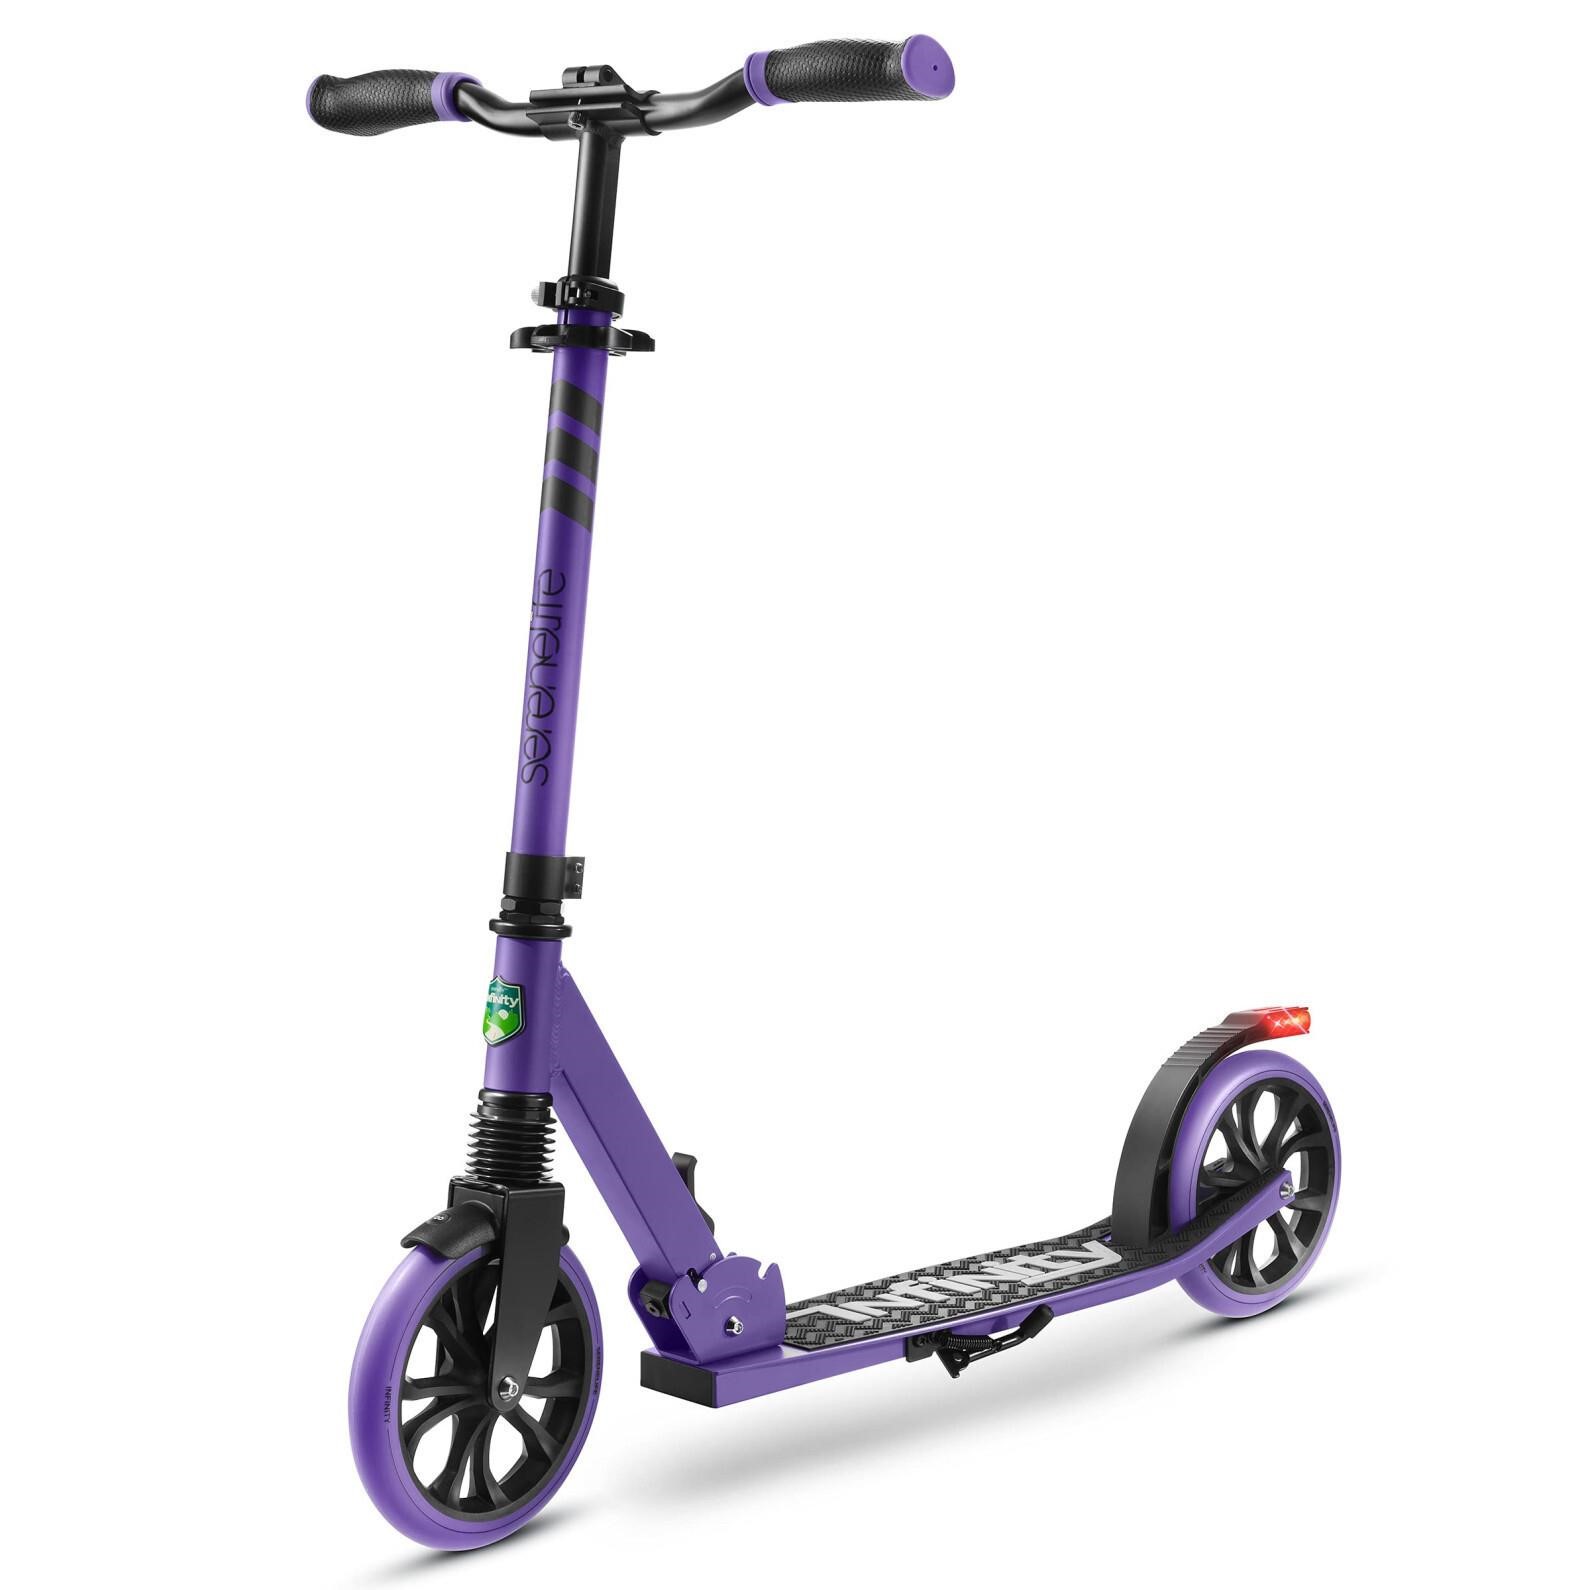 SereneLife Kick Scooter Adult Teenagers Kids- 2 Wh